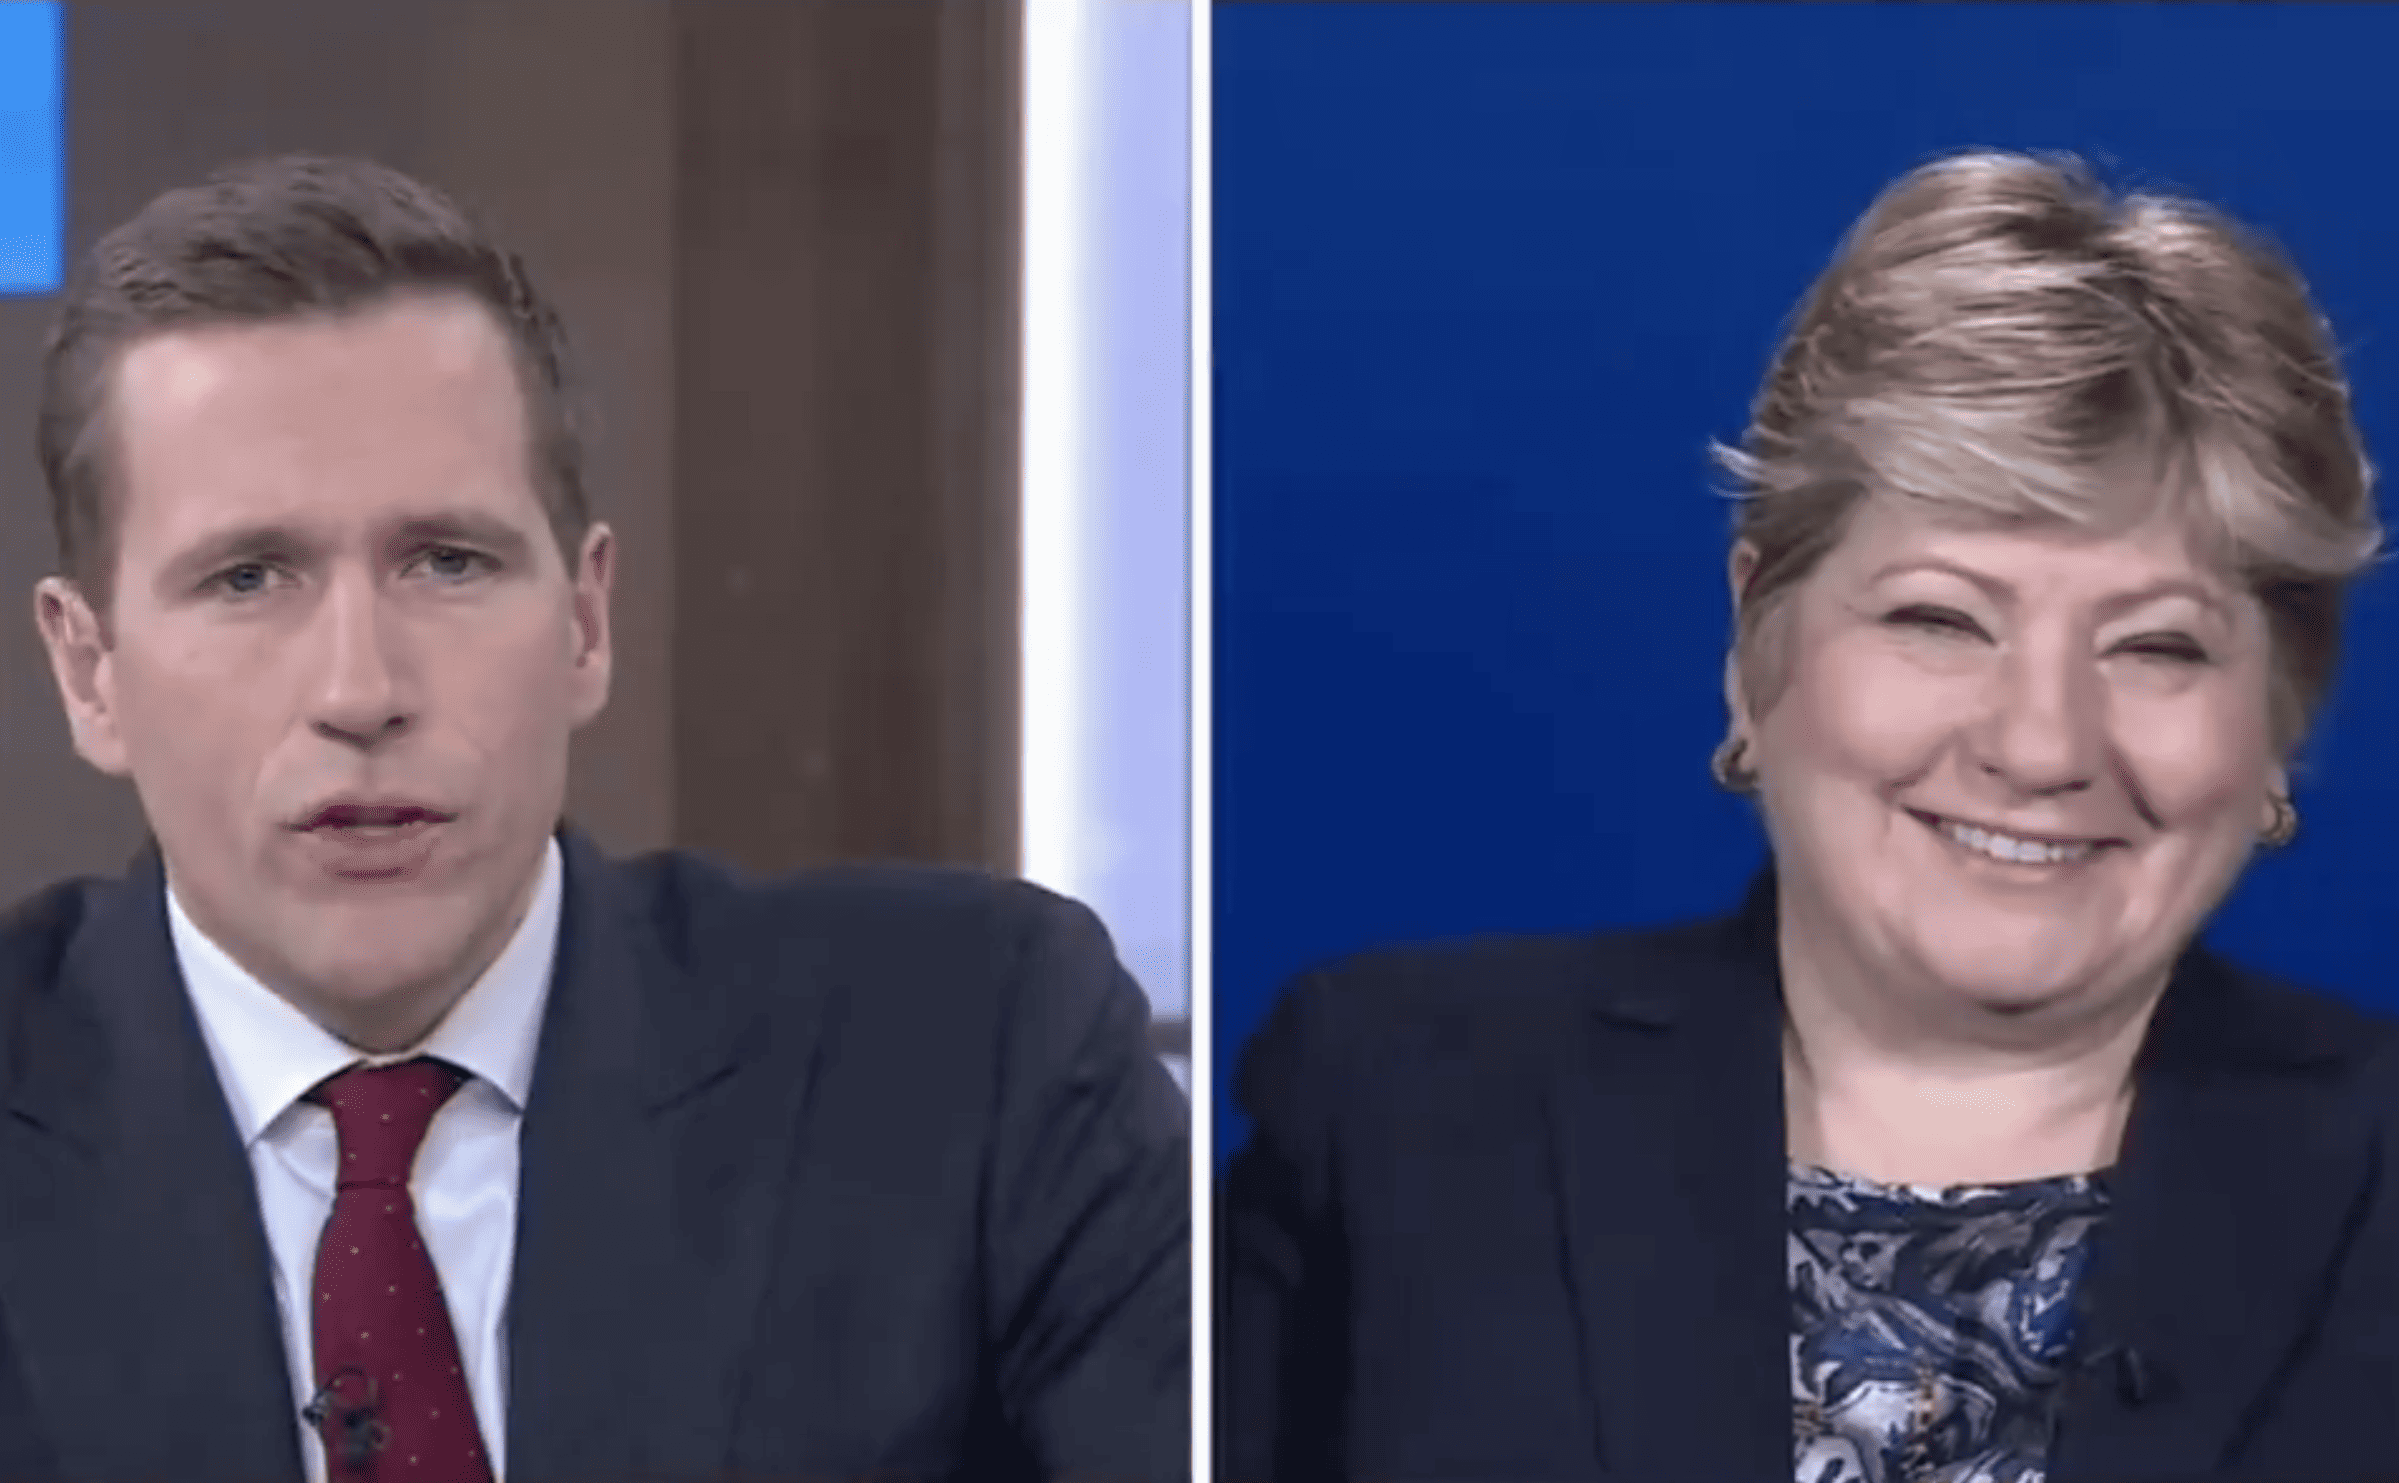 Thornberry says May election is ‘worst kept secret in parliament’